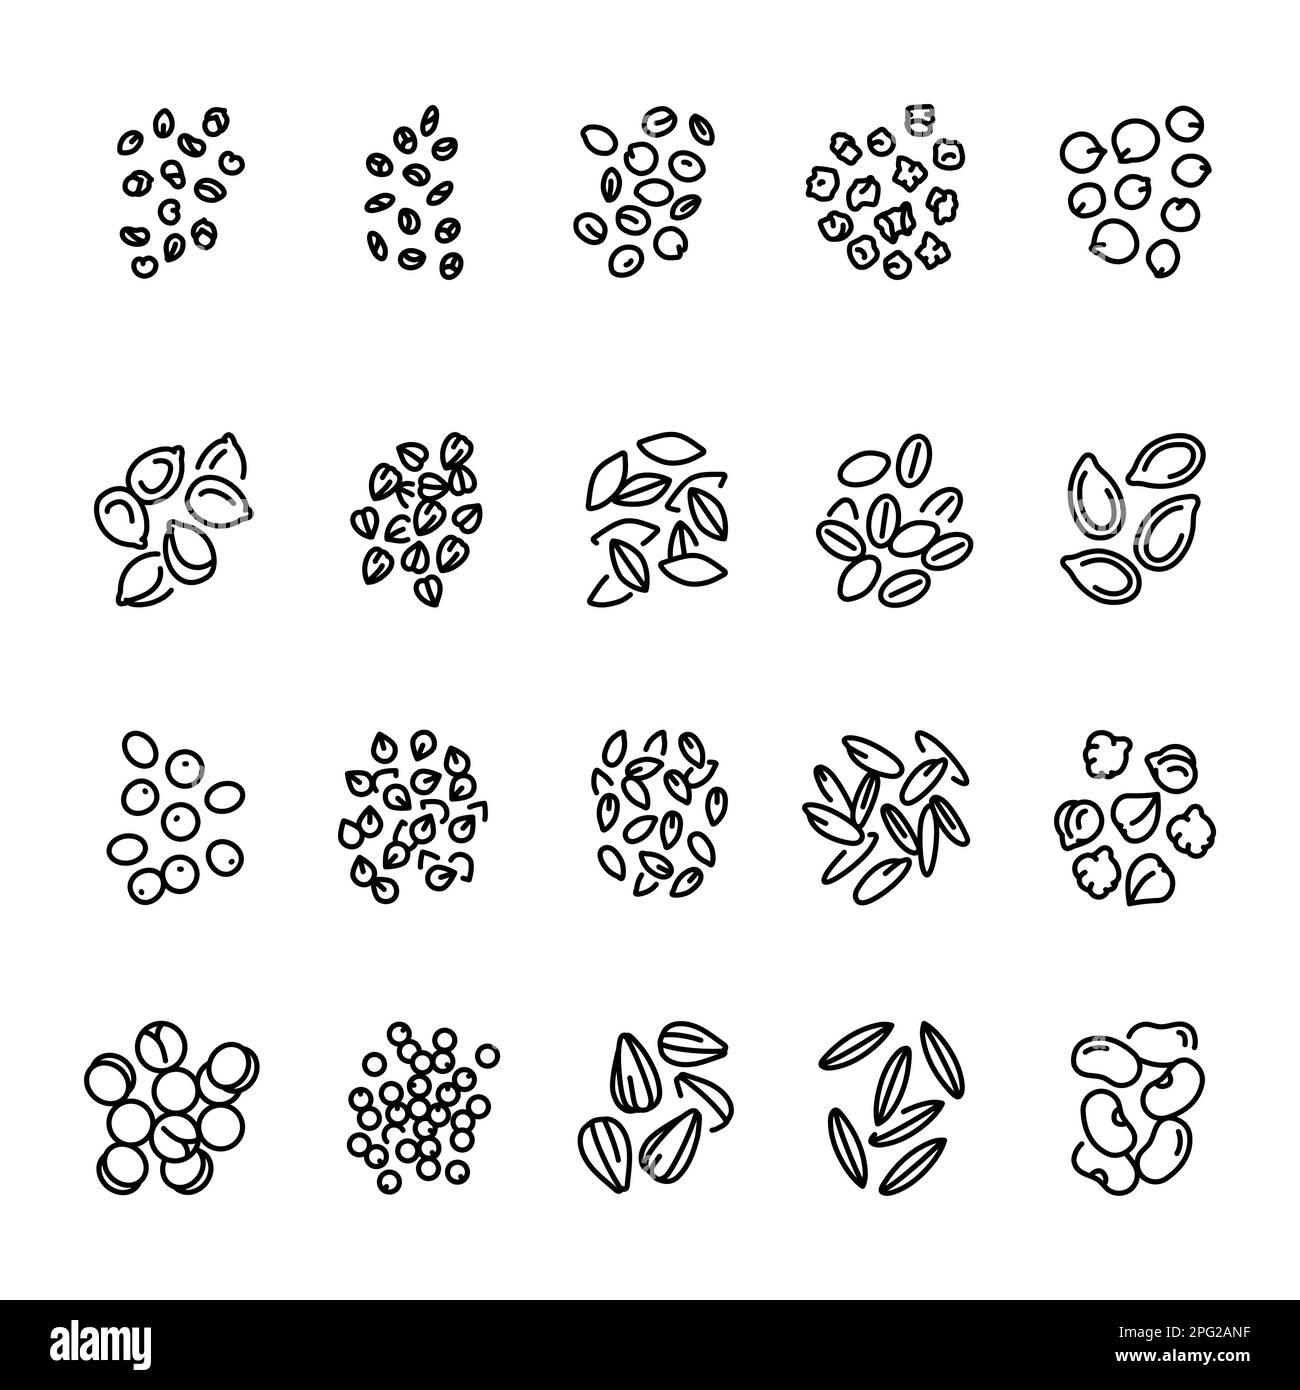 Grain and seeds black line icons set. Pictograms for web page, mobile app, promo. Stock Vector